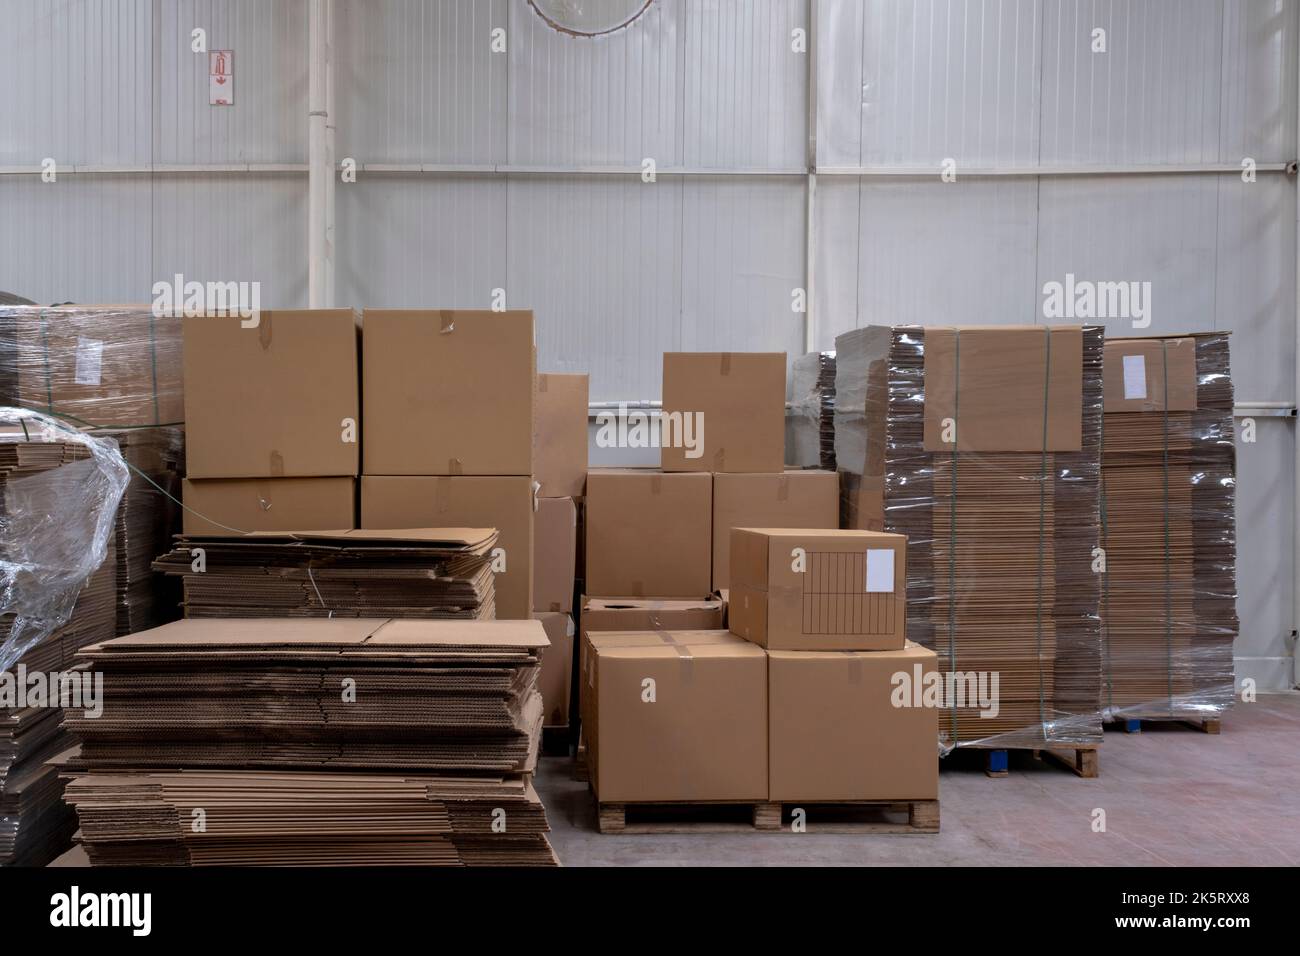 Large Retail Warehouse With Goods In Cardboard Boxes And Packages. Logistics, Sorting and Distribution Facility for More Product Delivery. Front View Stock Photo